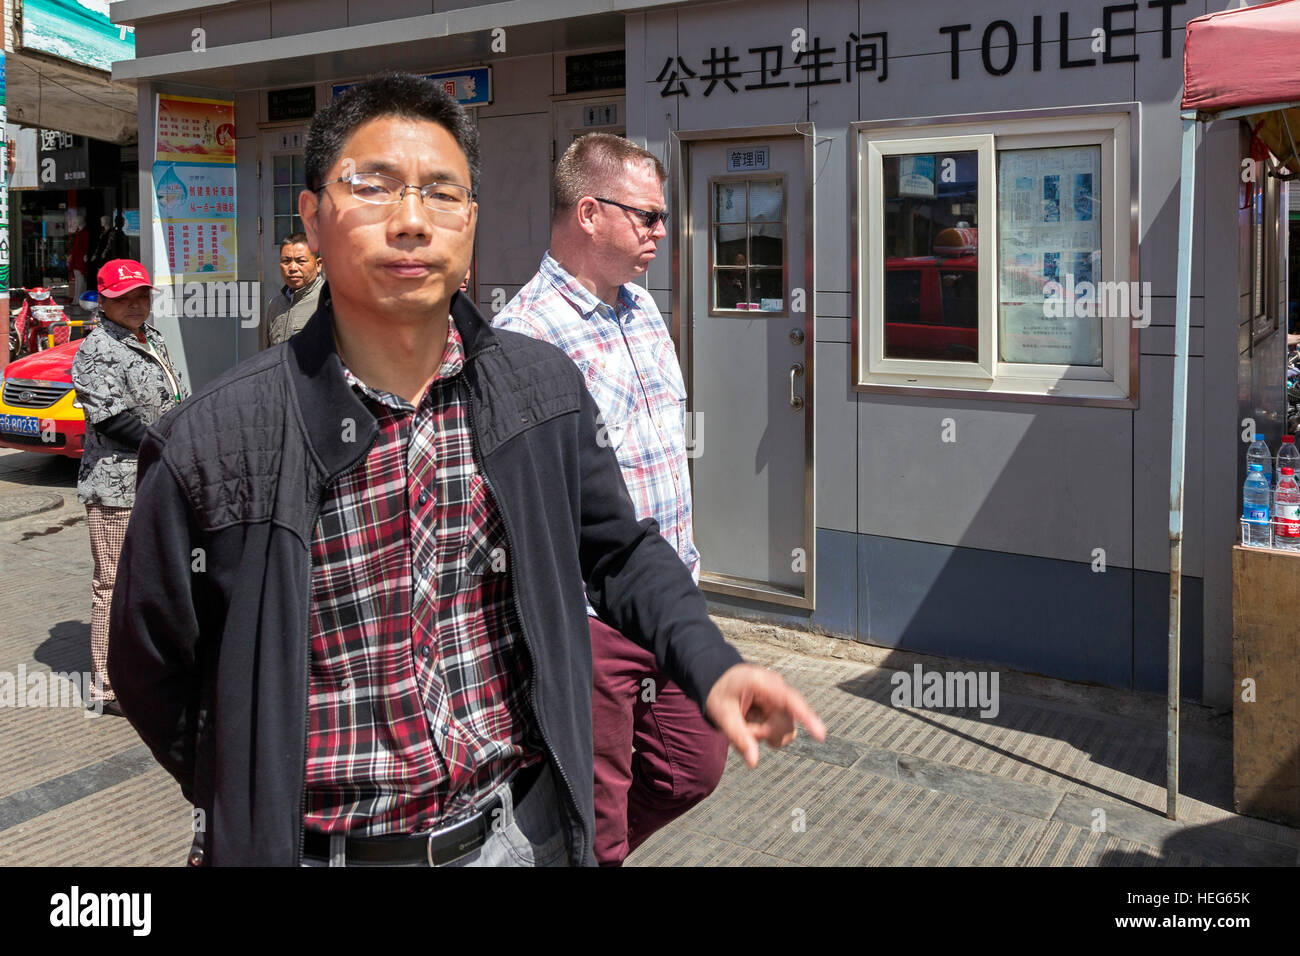 Tourists looking for a toilet in Shizuishan, Ningxia, China Stock Photo